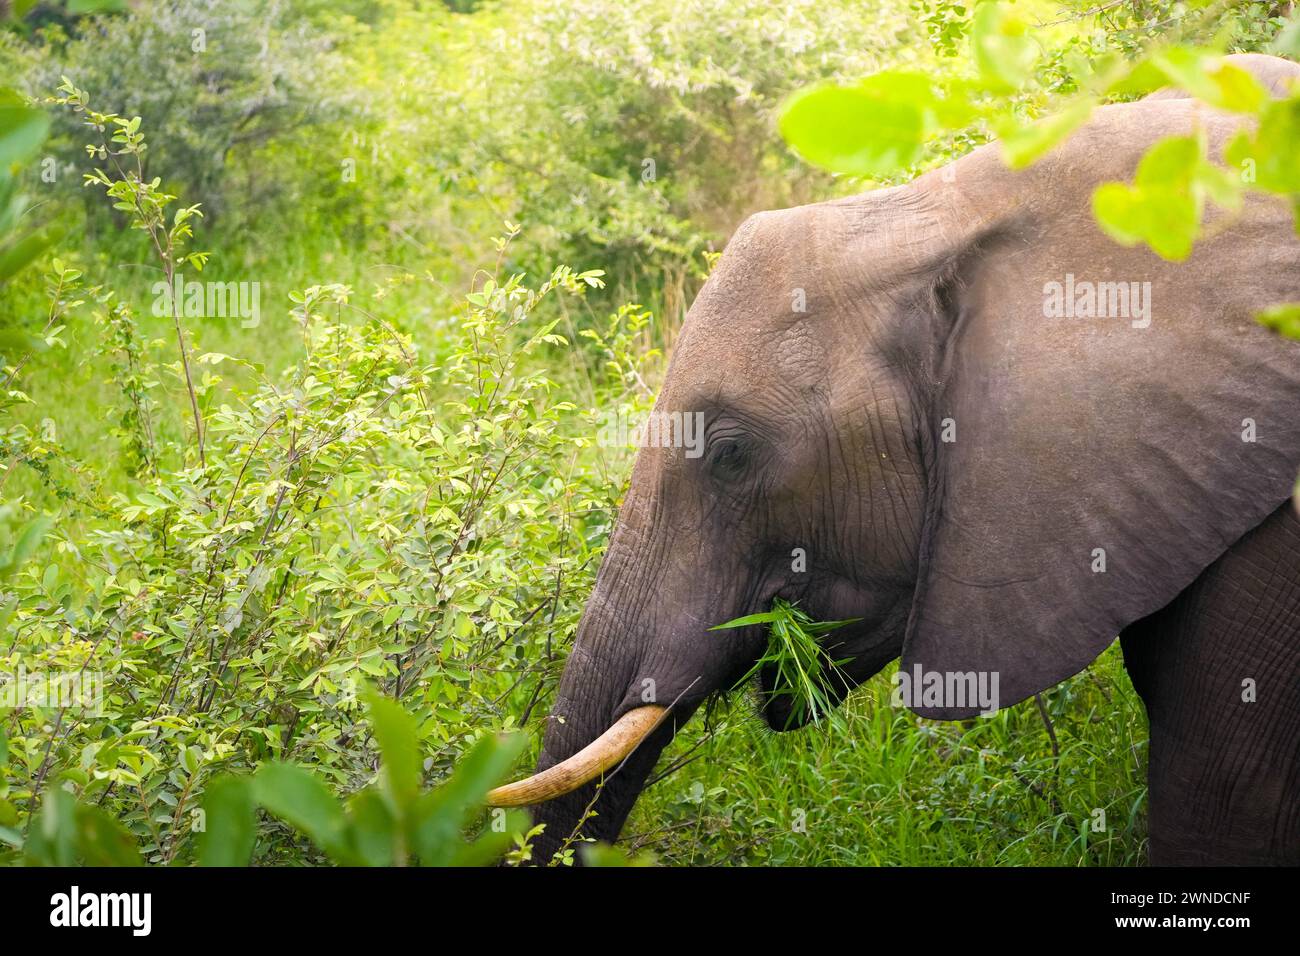 An African elephant is captured in a natural setting as it grazes on the fresh greenery that surrounds it. The tranquility of the scene is palpable, w Stock Photo